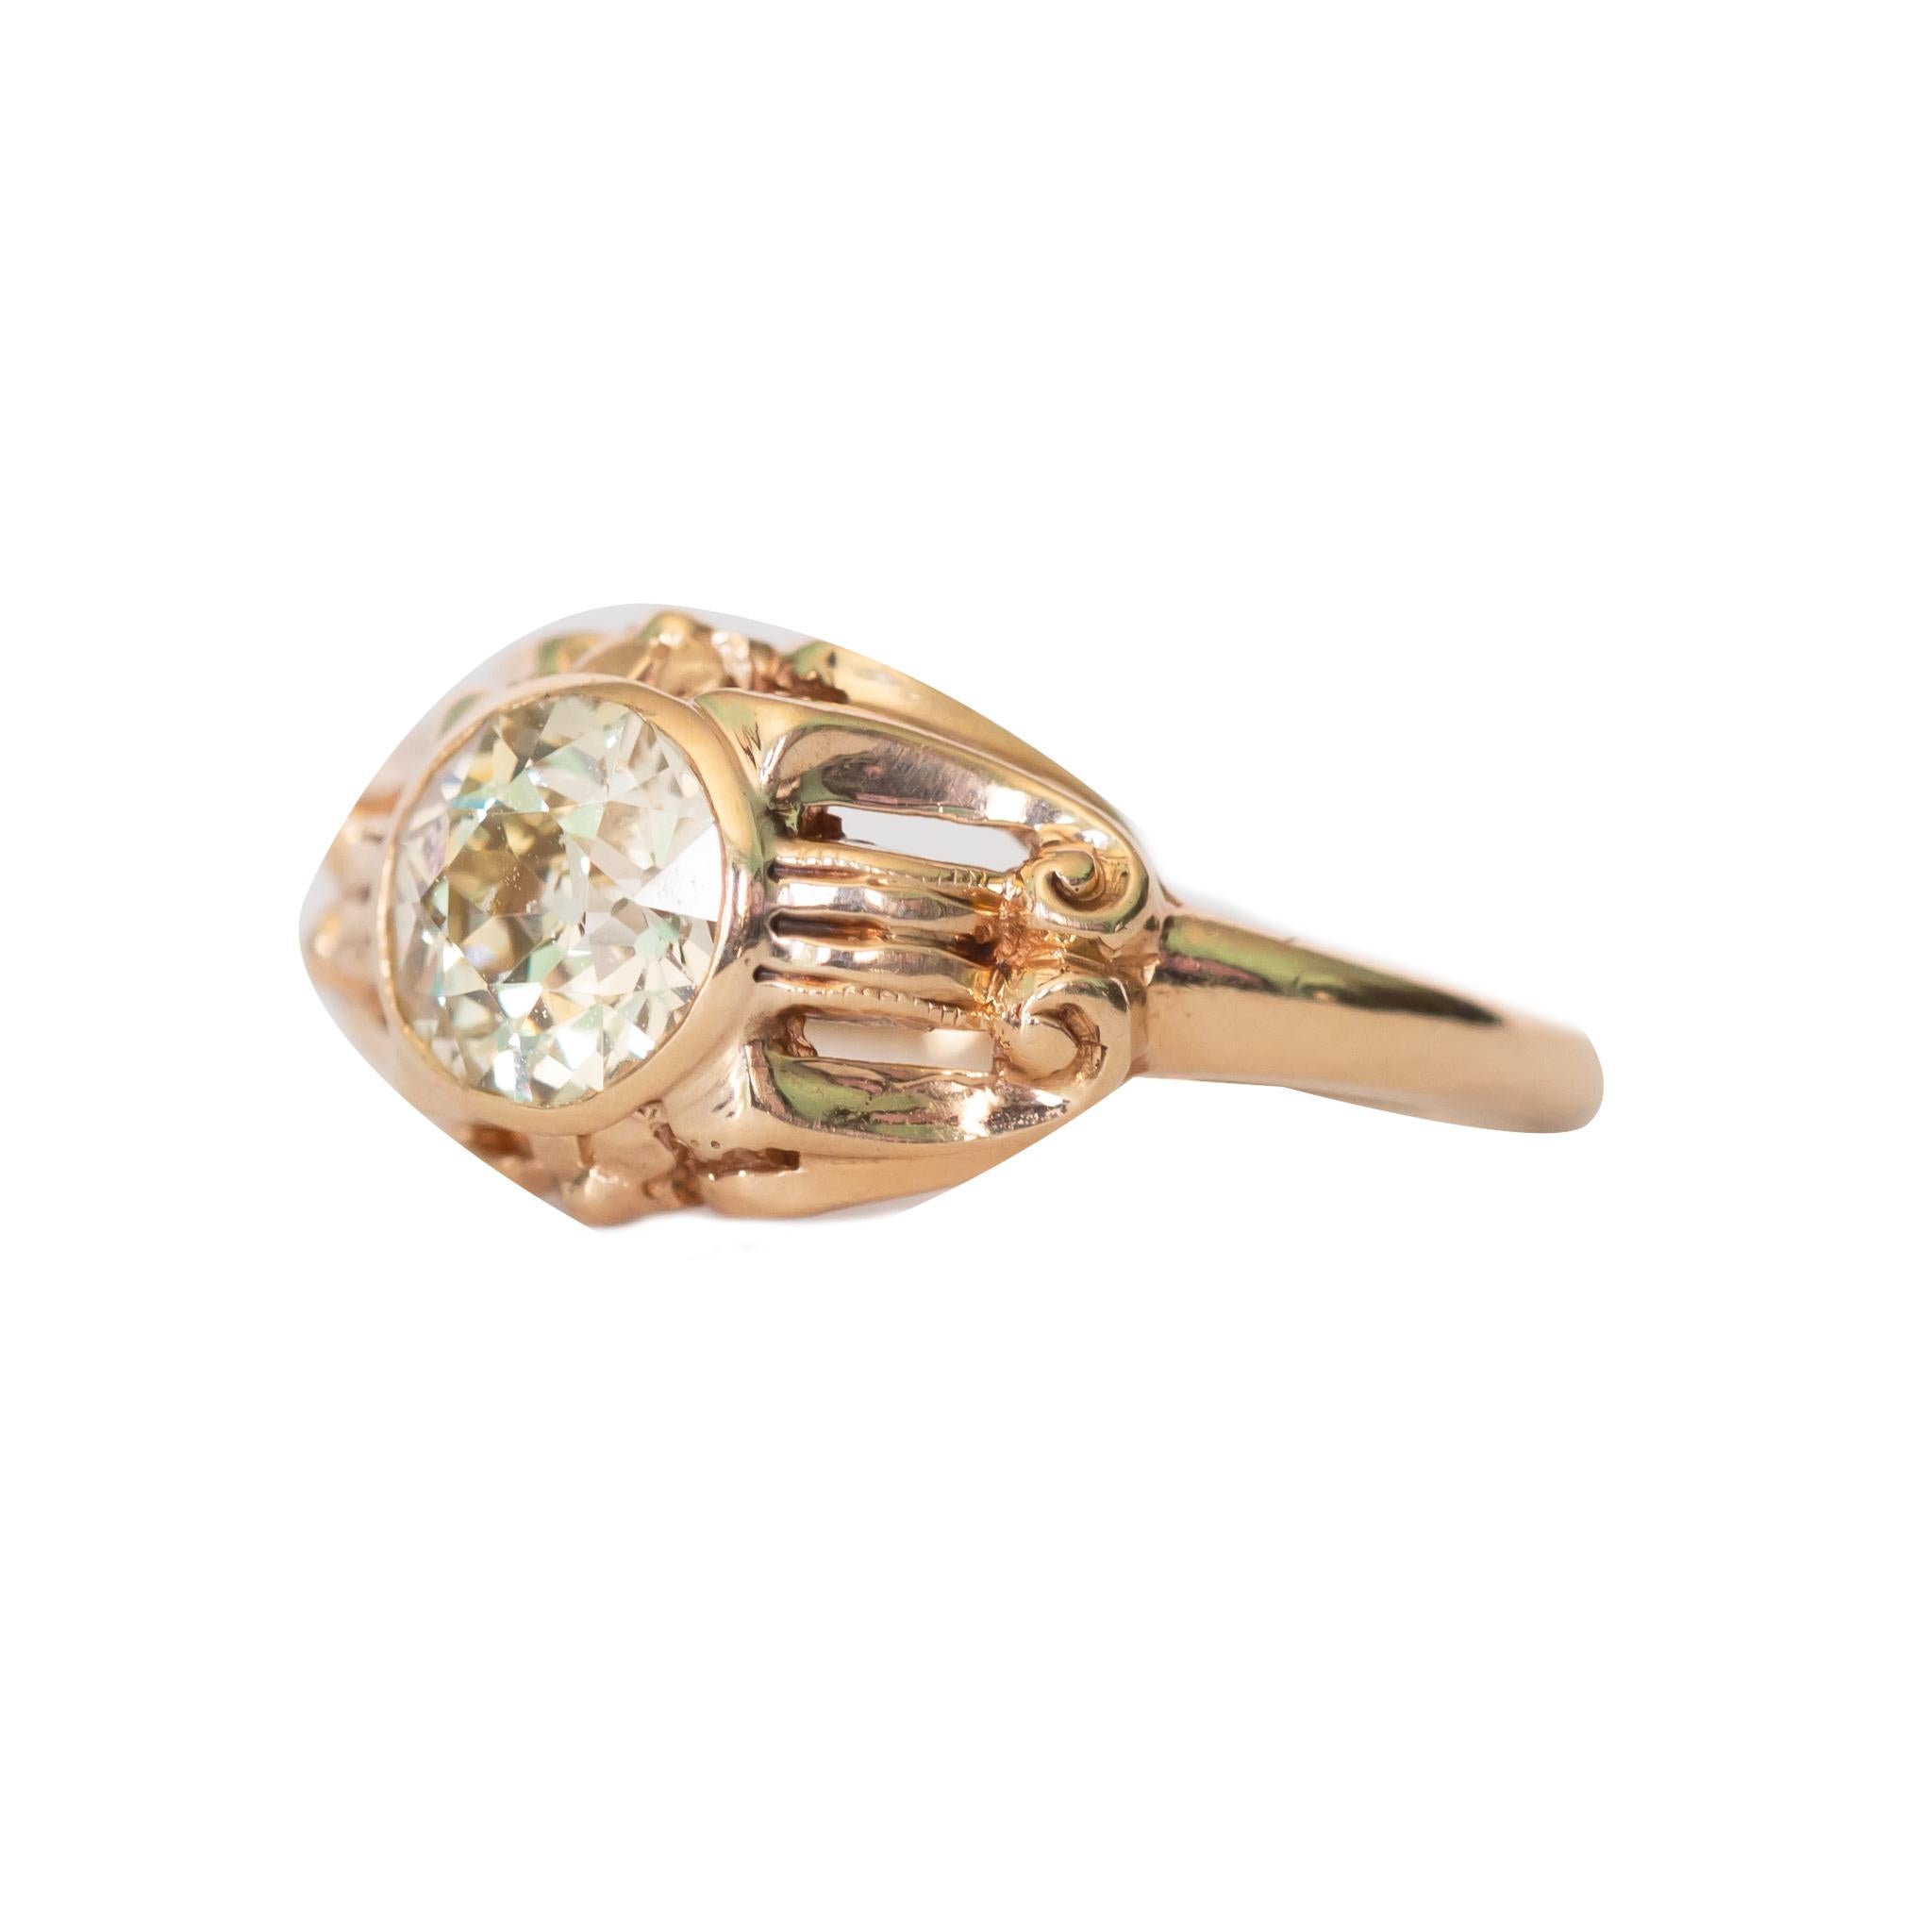 Ring Size: 7
Metal Type: 14k Yellow Gold [Hallmarked, and Tested]
Weight:  3 grams

Center Diamond Details:
GIA REPORT#2205989251
Weight: .85 carat
Cut: Old European Brilliant 
Color: Q to R Range
Clarity: VS1

Condition:  Excellent